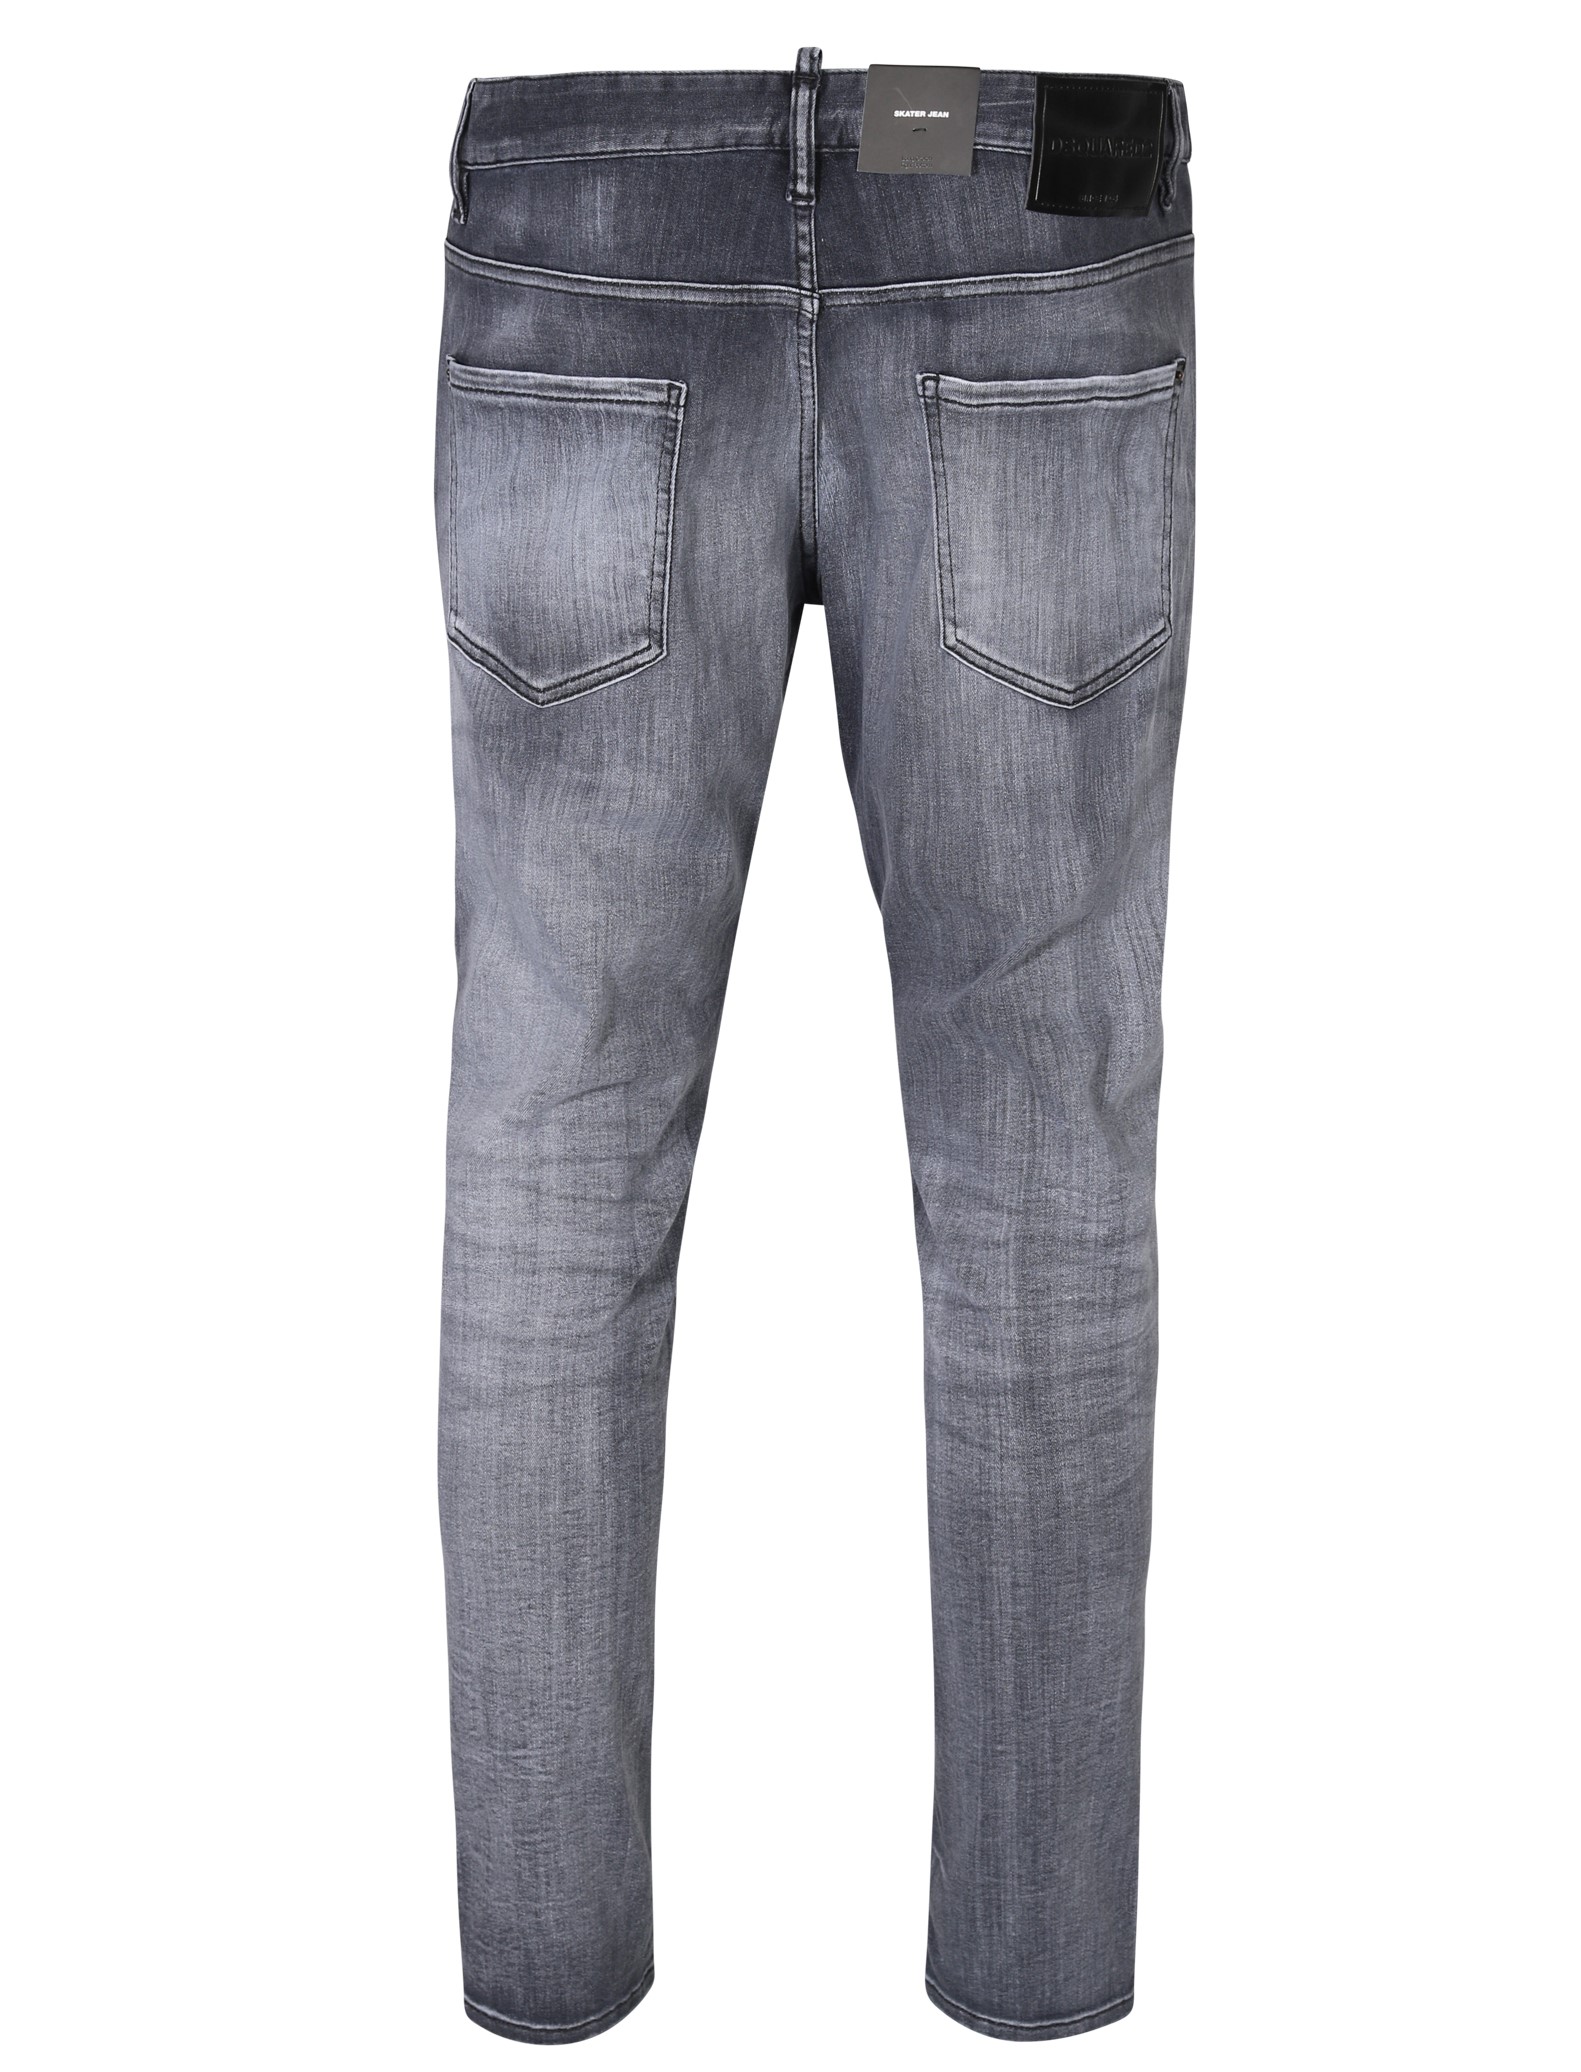 DSQUARED2 Skater Jeans in Washed Grey 54